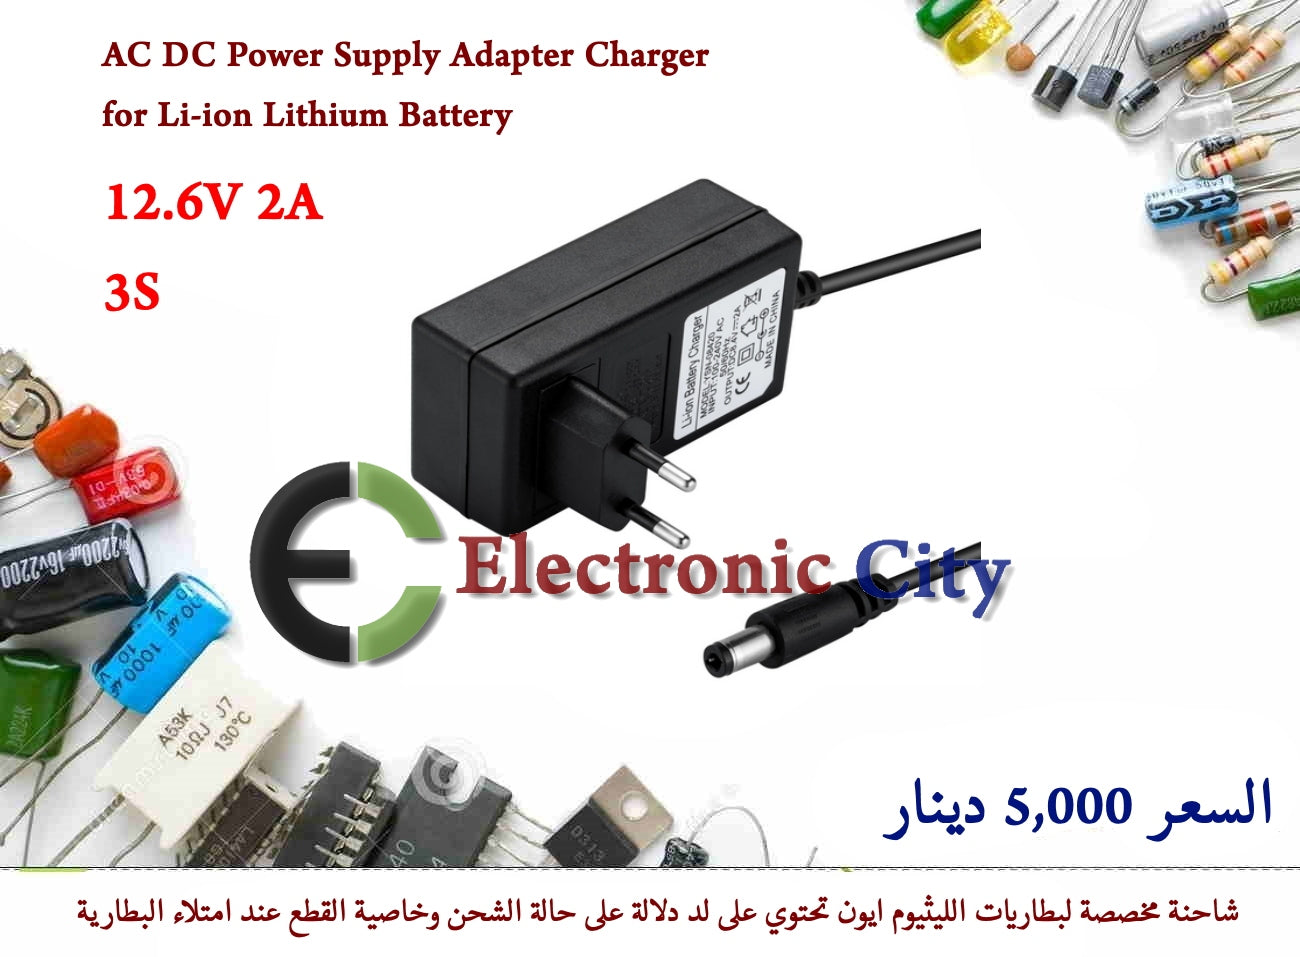 12.6V 2A AC DC Power Supply Adapter Charger for 3S Li-ion Lithium Battery